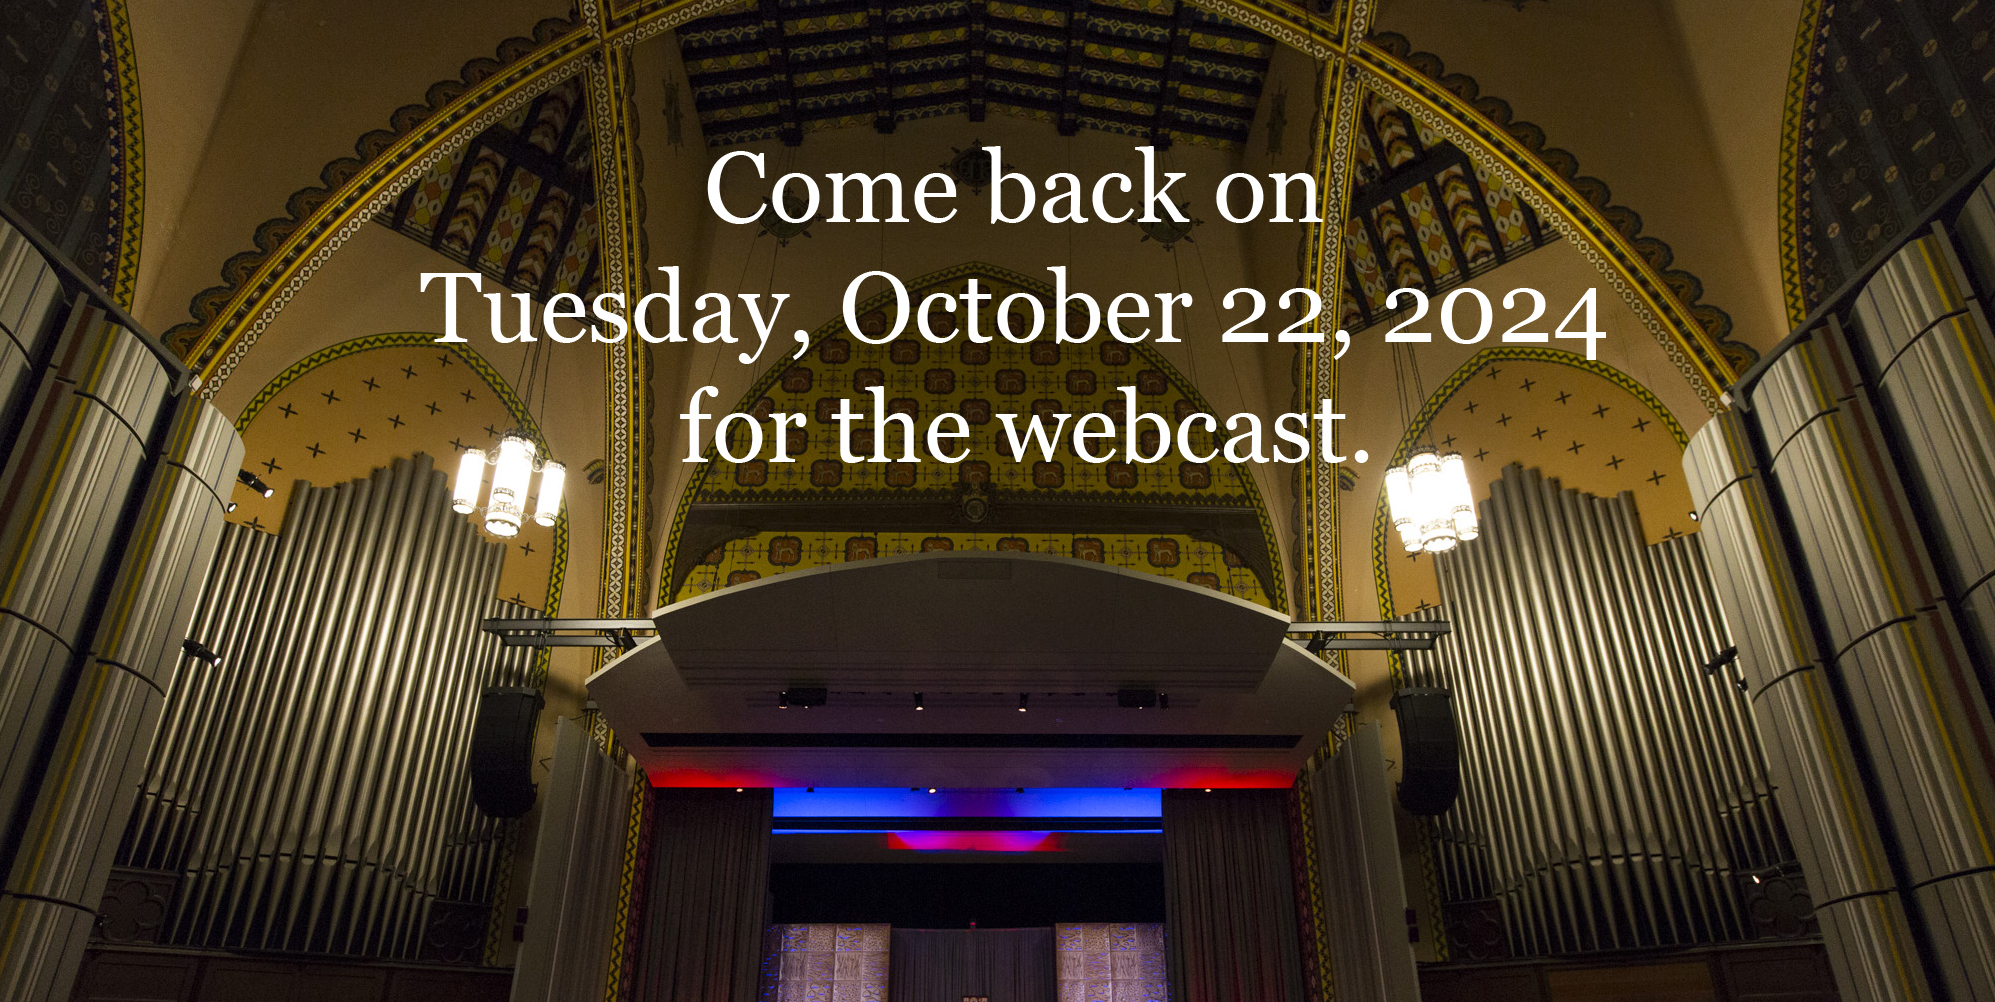 Come back on Tuesday October 22, 2024 for the webcast.